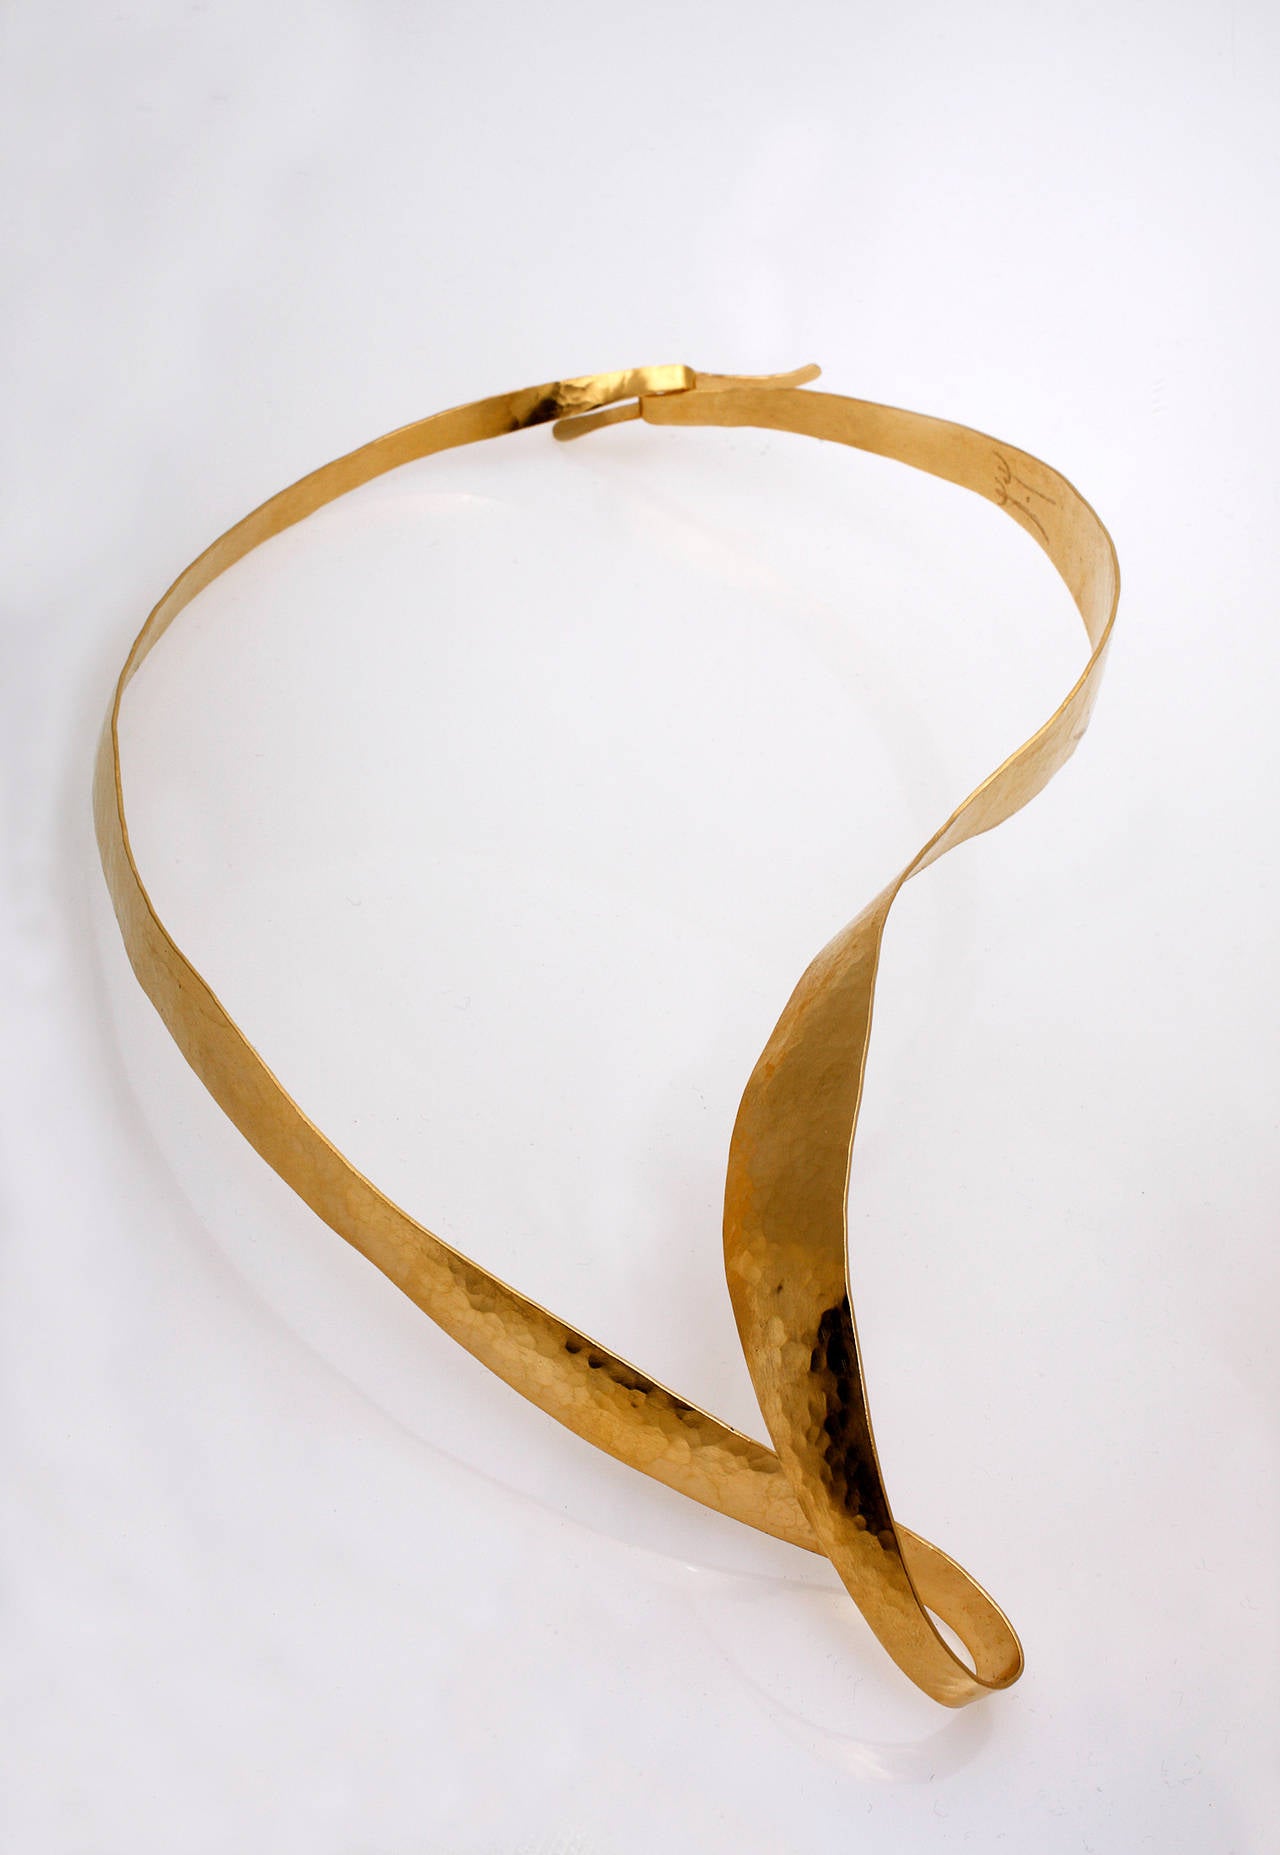 This elegant piece of jewelry is hand-sculpted and hammered in brass by sculptor designer Jacques Jarrige then gold-plated with 18-karat gold (three microns).

The movement achieved in this necklace is ravishing and echoes his iconic pieces of